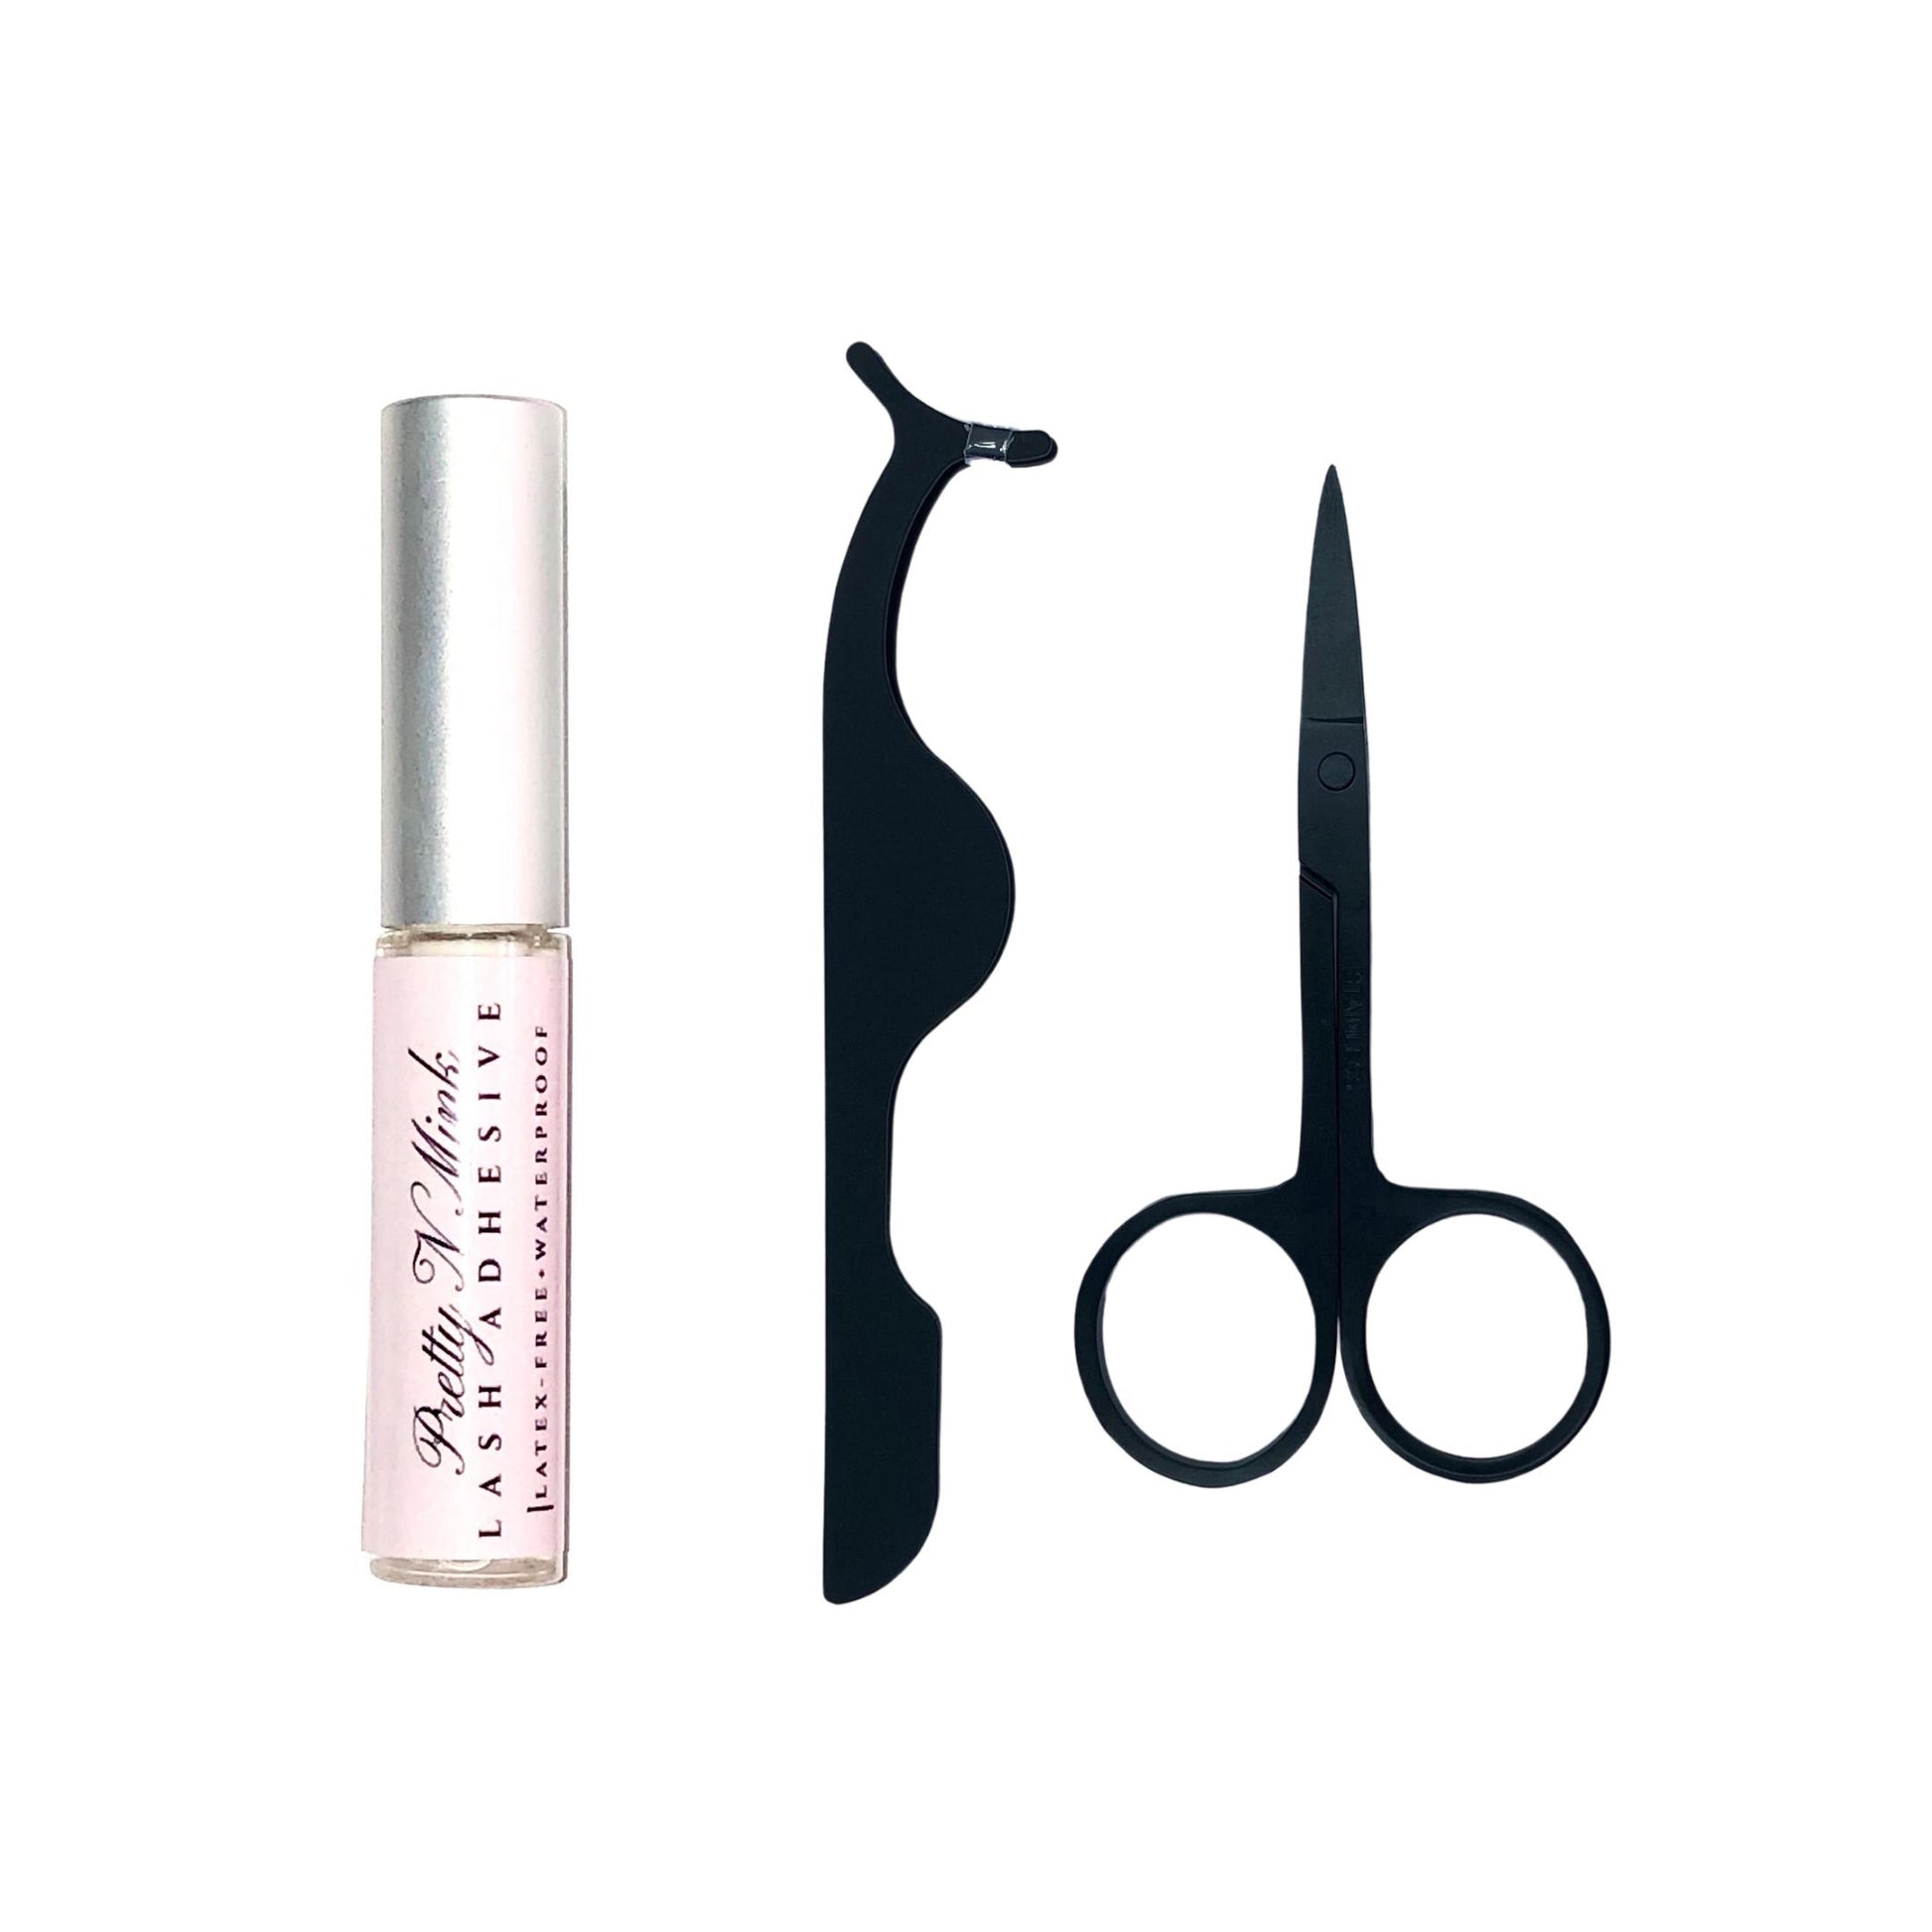 Lash Tool Set + Adhesive-Our Lash Tool Set + Adhesive includes everything you need for an easy lash application. This set is perfect for lash beginners that need tools and adhesive to get started or if you simply need to stock up on your everyday lash necessities. It includes a full-size lash adhesive, lash applicator, and pair of mini scissors. The compact size makes it perfect to add to your makeup/travel bag. Description Includes: 1 Lash Adhesive, 1 Lash Applicator, and 1 Pair of Mini Scissor